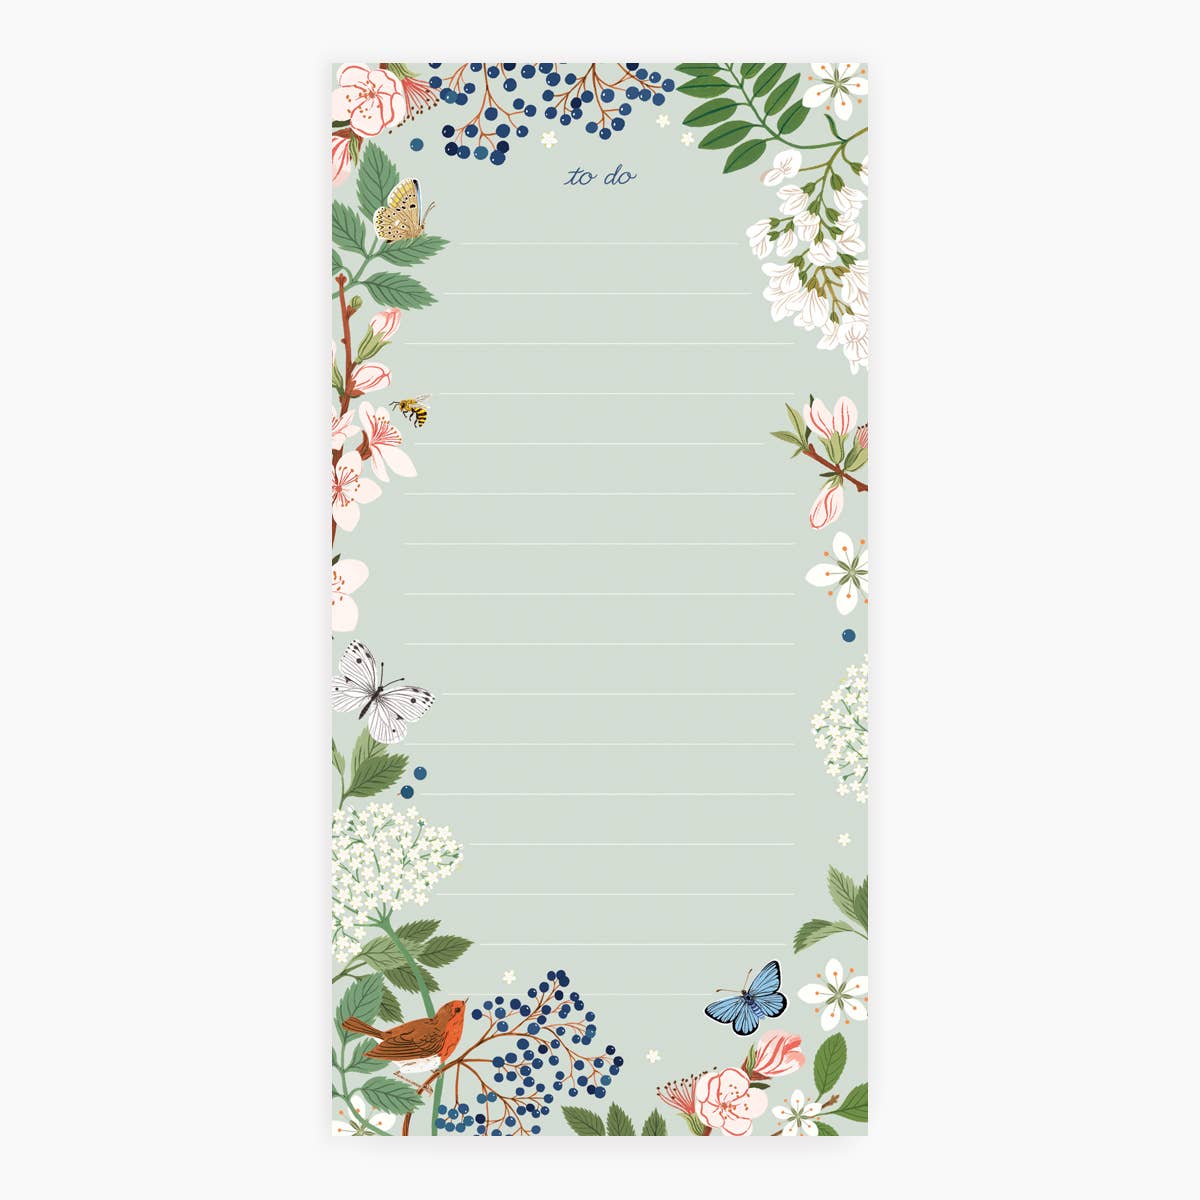 Flowering trees, flowers and Bird "To Do" Notepad - Abigail Fox Designs